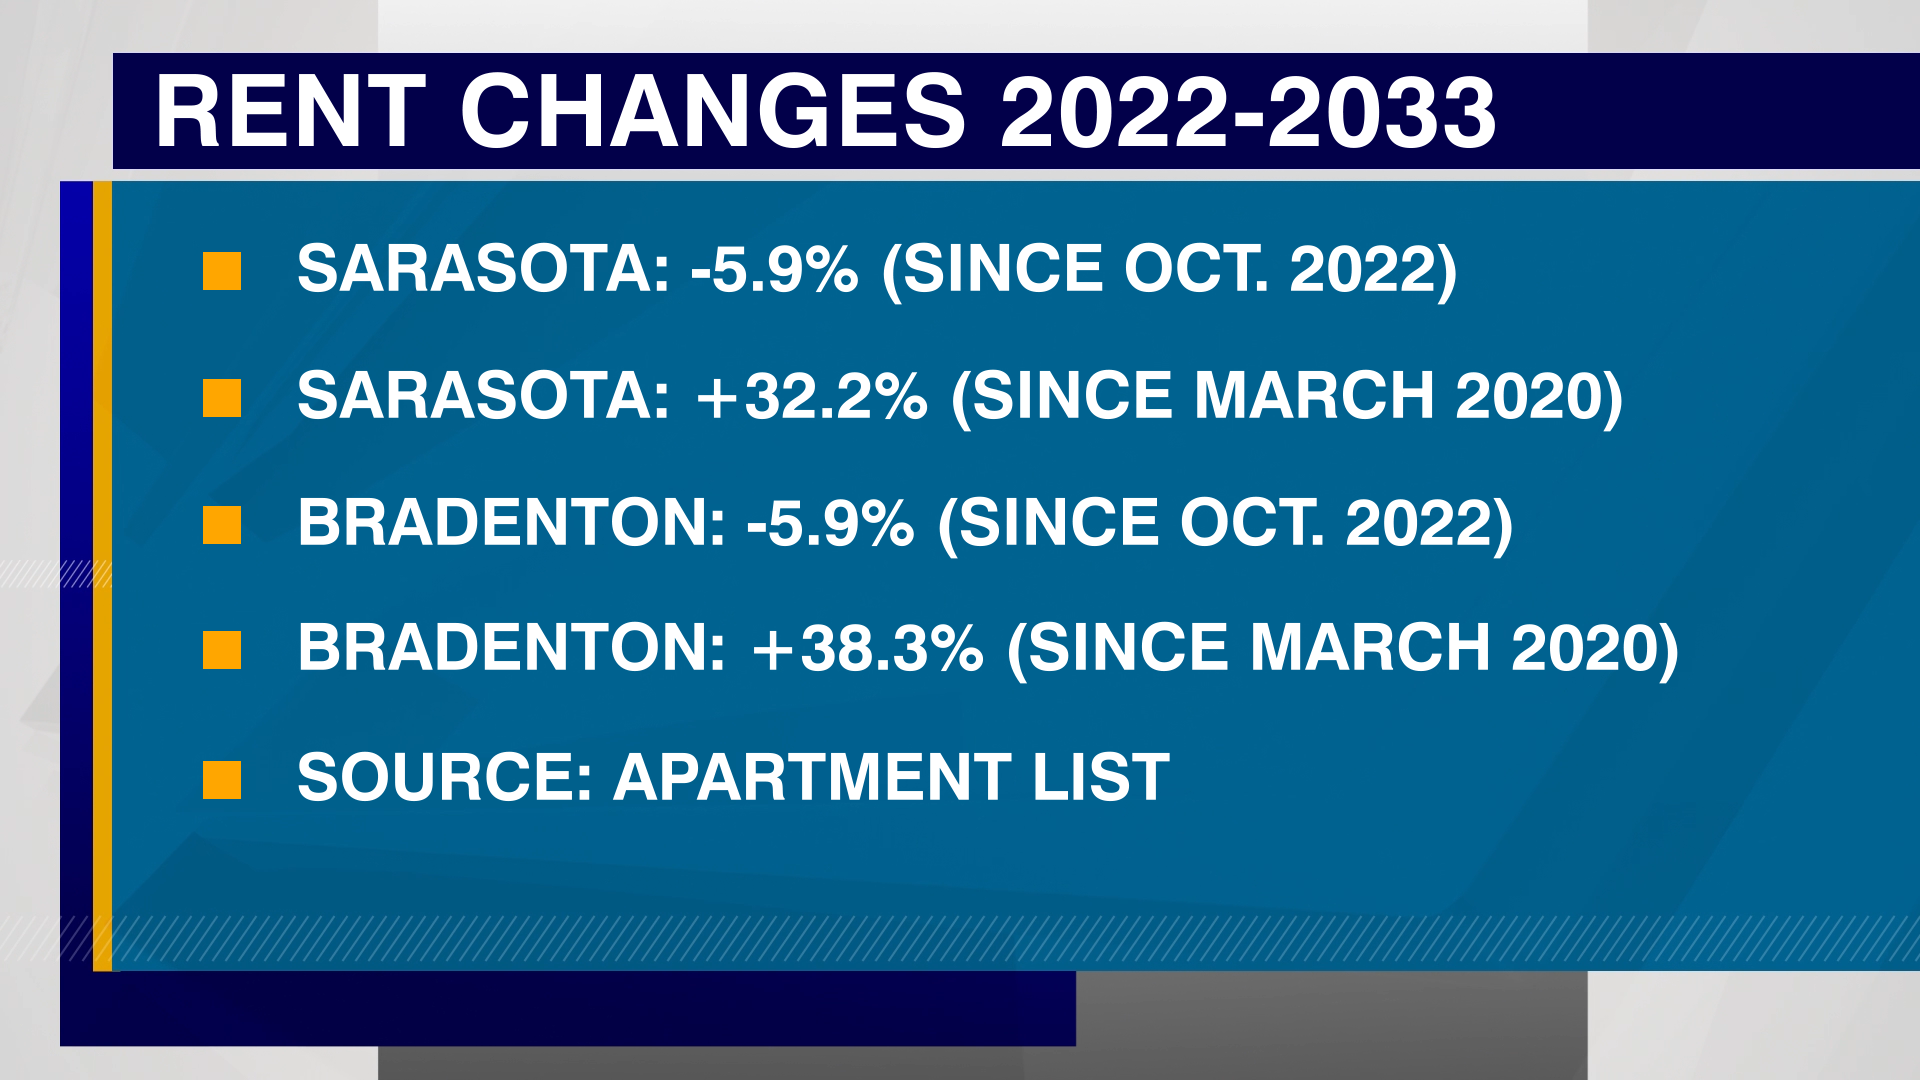 Rents are still higher than before March 2020, but they've come down since 2022.